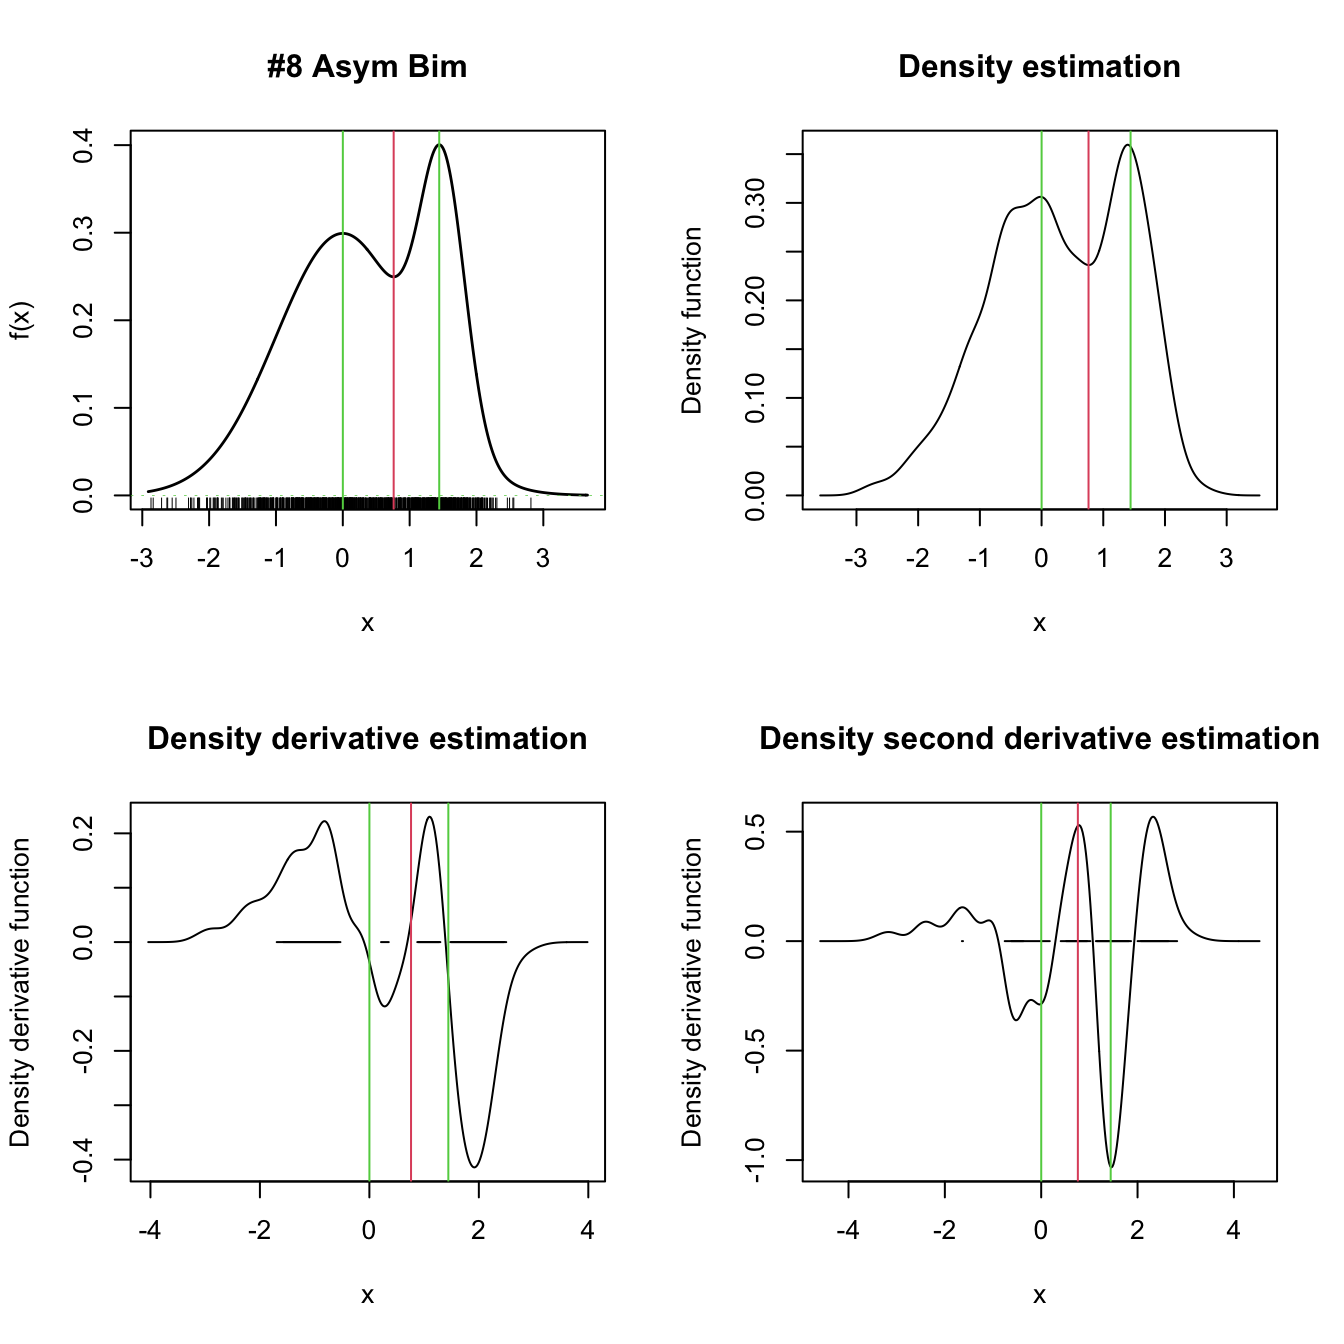 Univariate density derivative estimation for \(r=0,1,2.\) The green vertical bars represent the modes (local maxima) and the red vertical bar the antimode (local minimum) of nor1mix::MW8. Observe how the density derivative estimation vanishes at the local extrema and how the second derivative estimation captures the sign of the extrema, thus indicating the presence of a mode or an antimode.